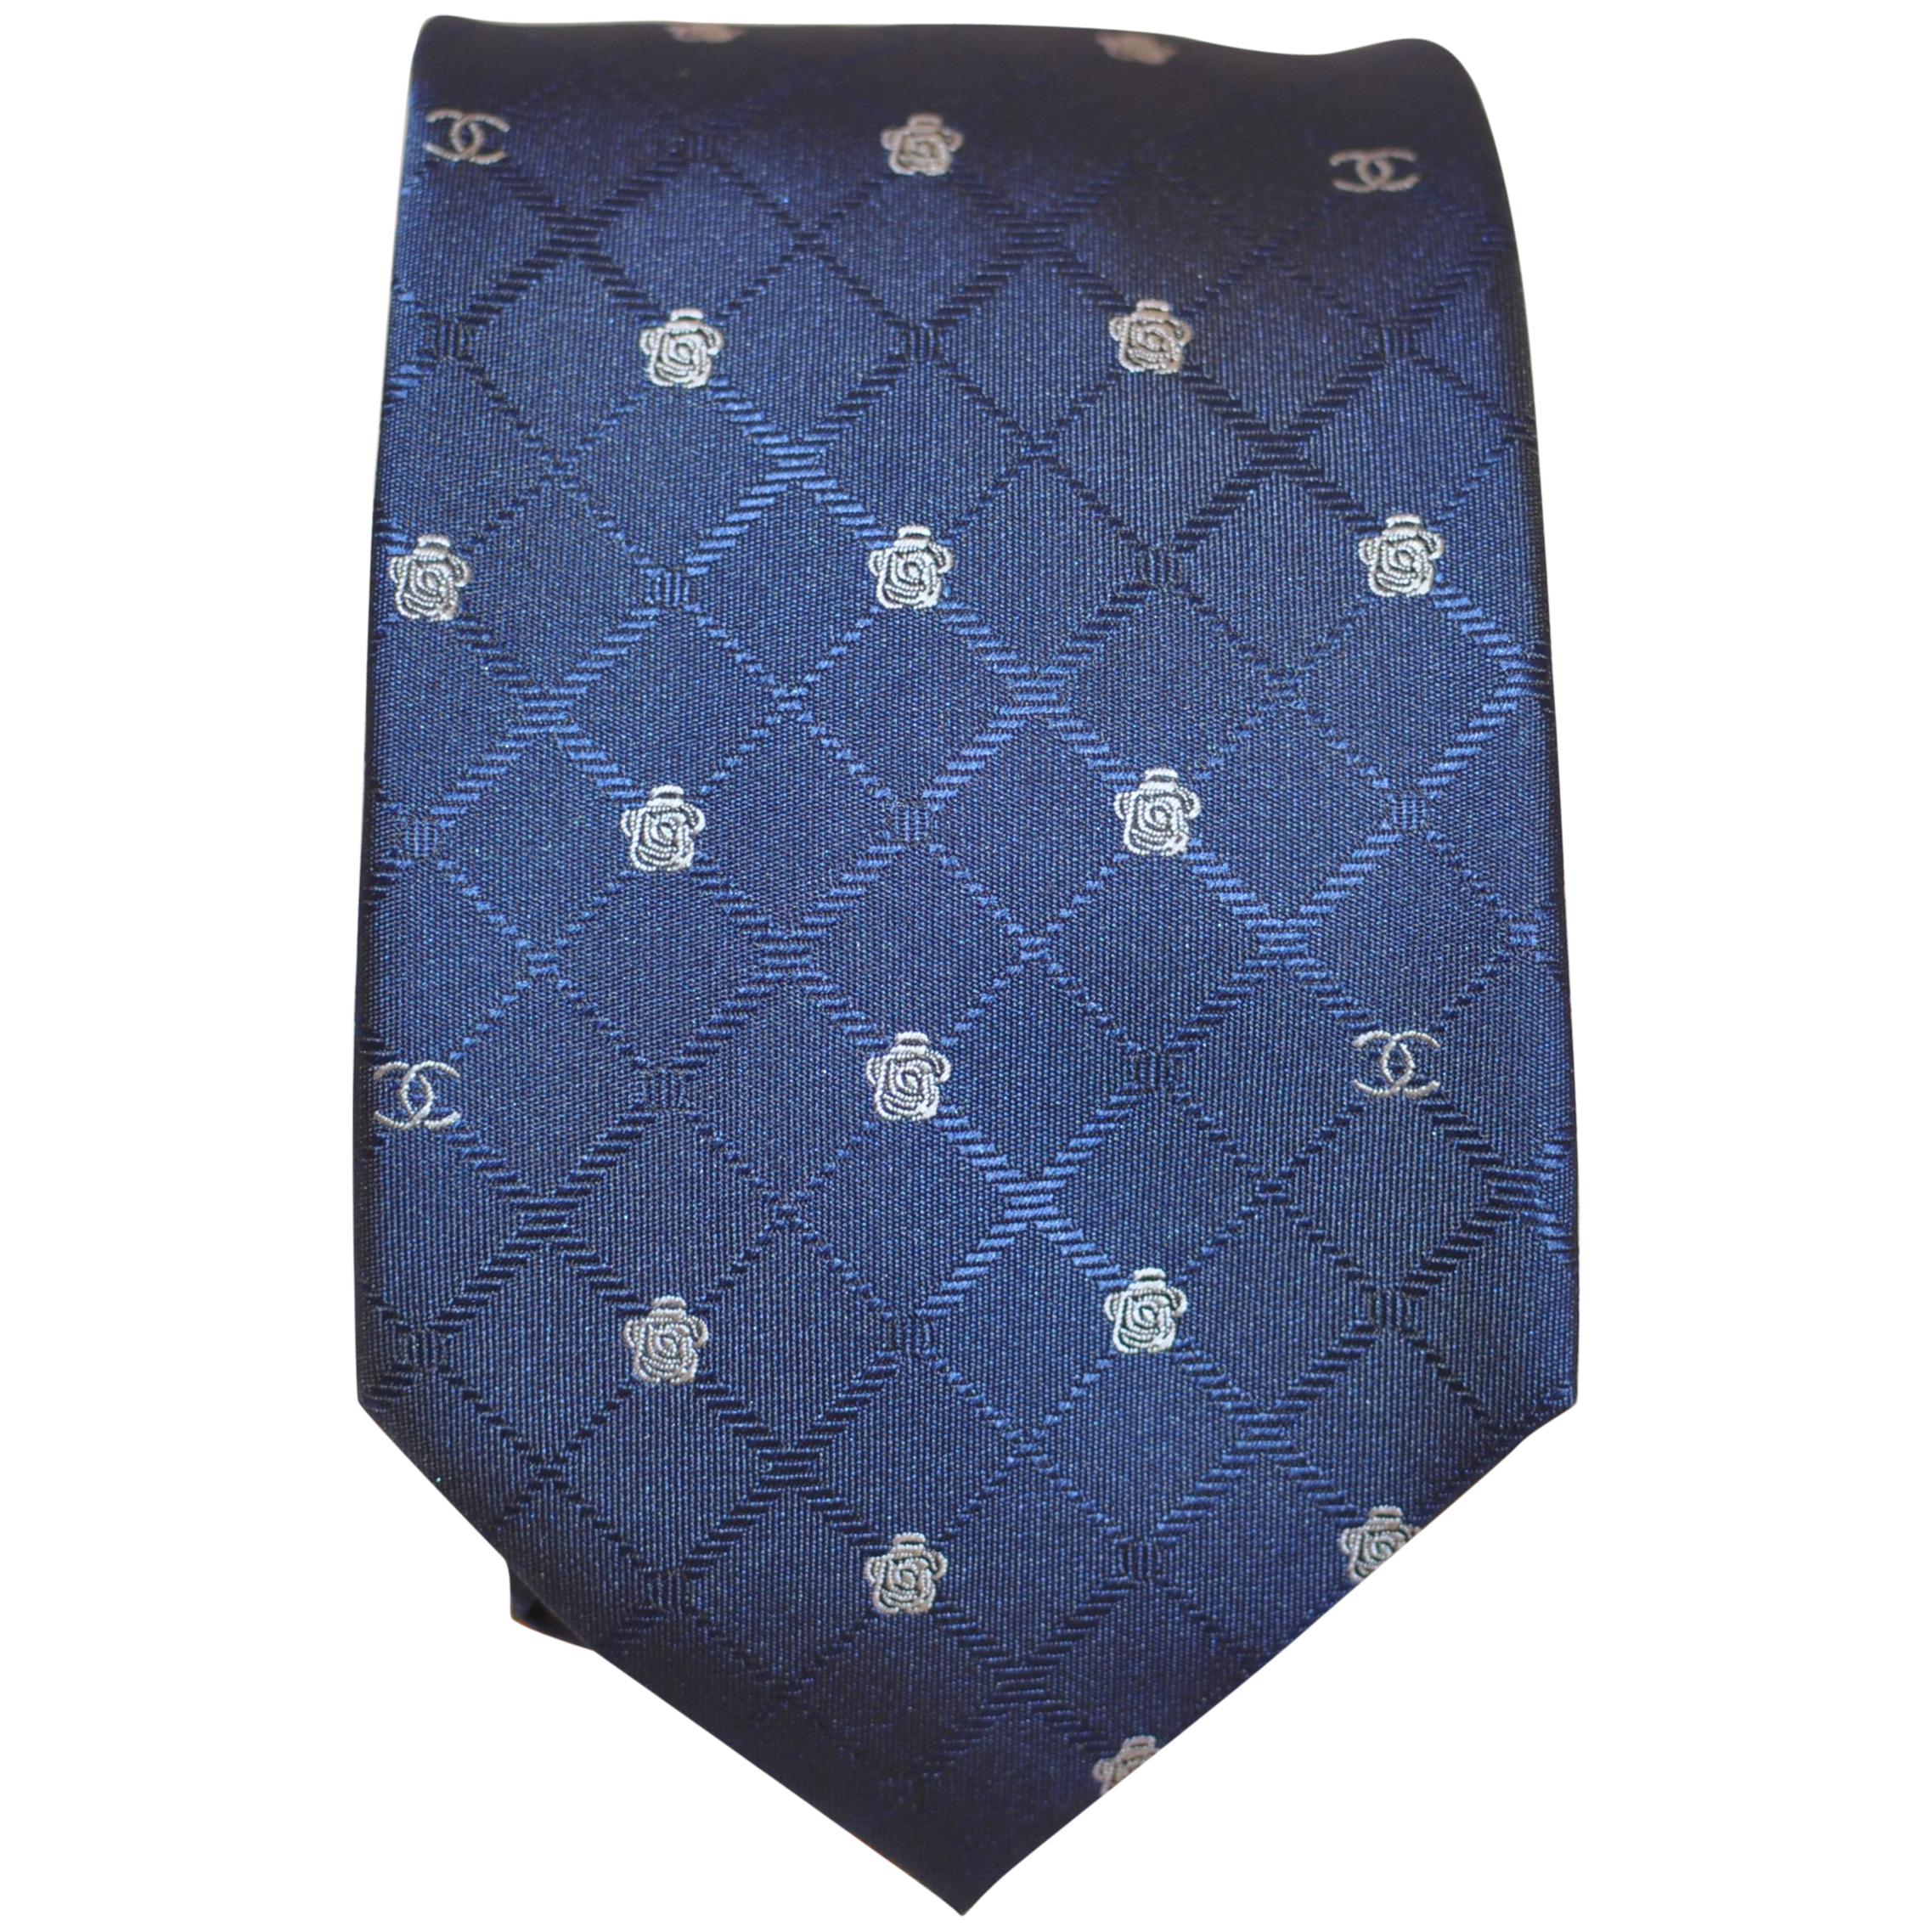 Chanel 1990s Silk Tie w/Iconic Logo and Camellia Flower Print